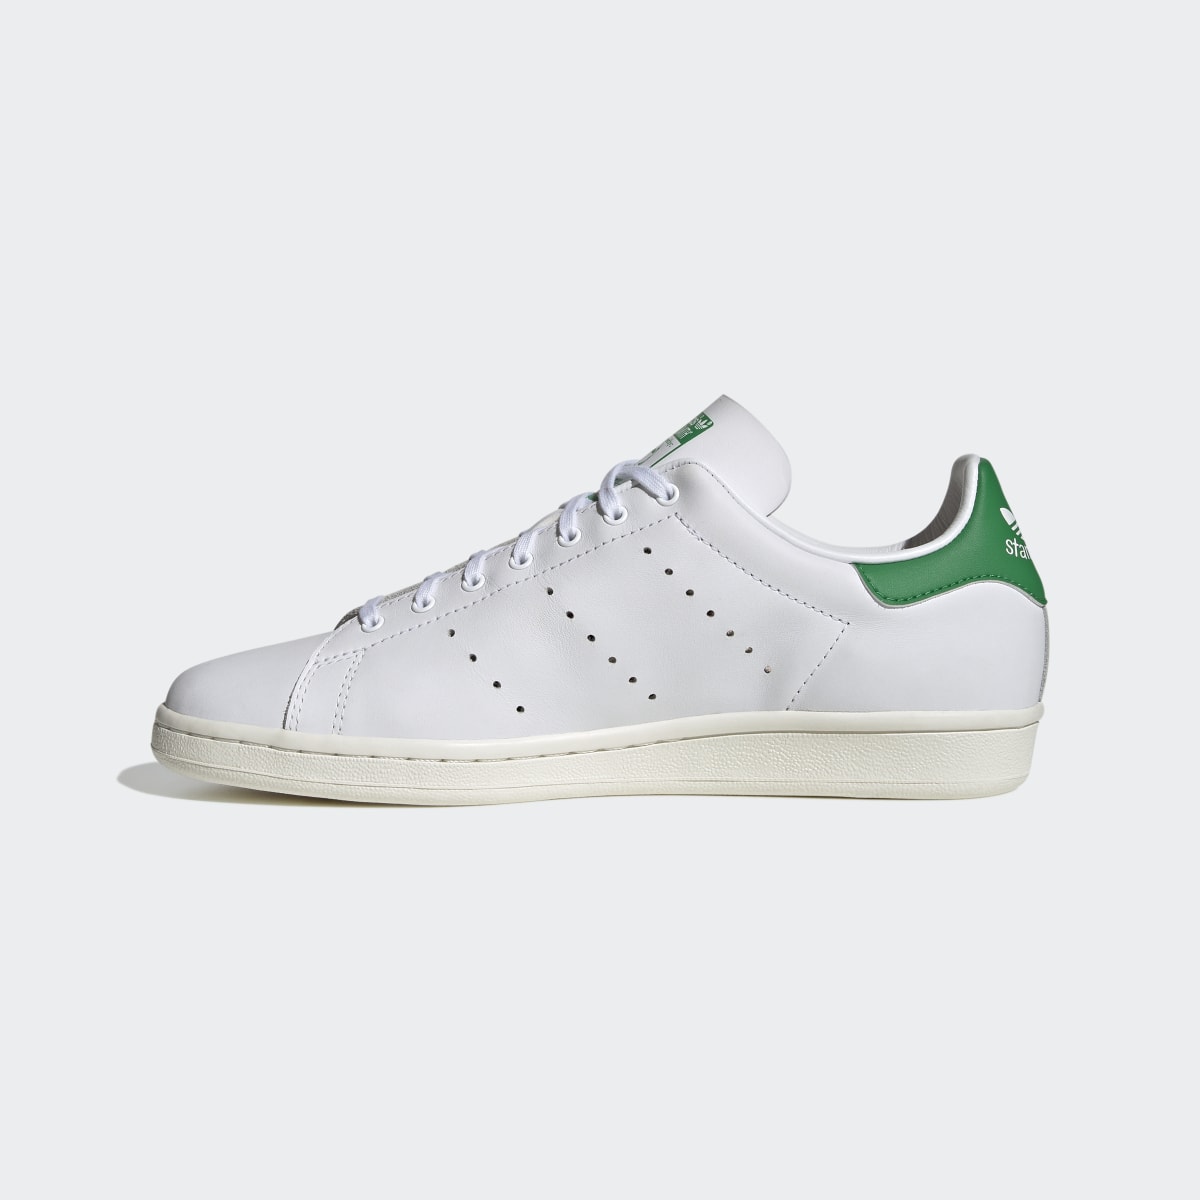 Adidas Chaussure Stan Smith 80s. 7